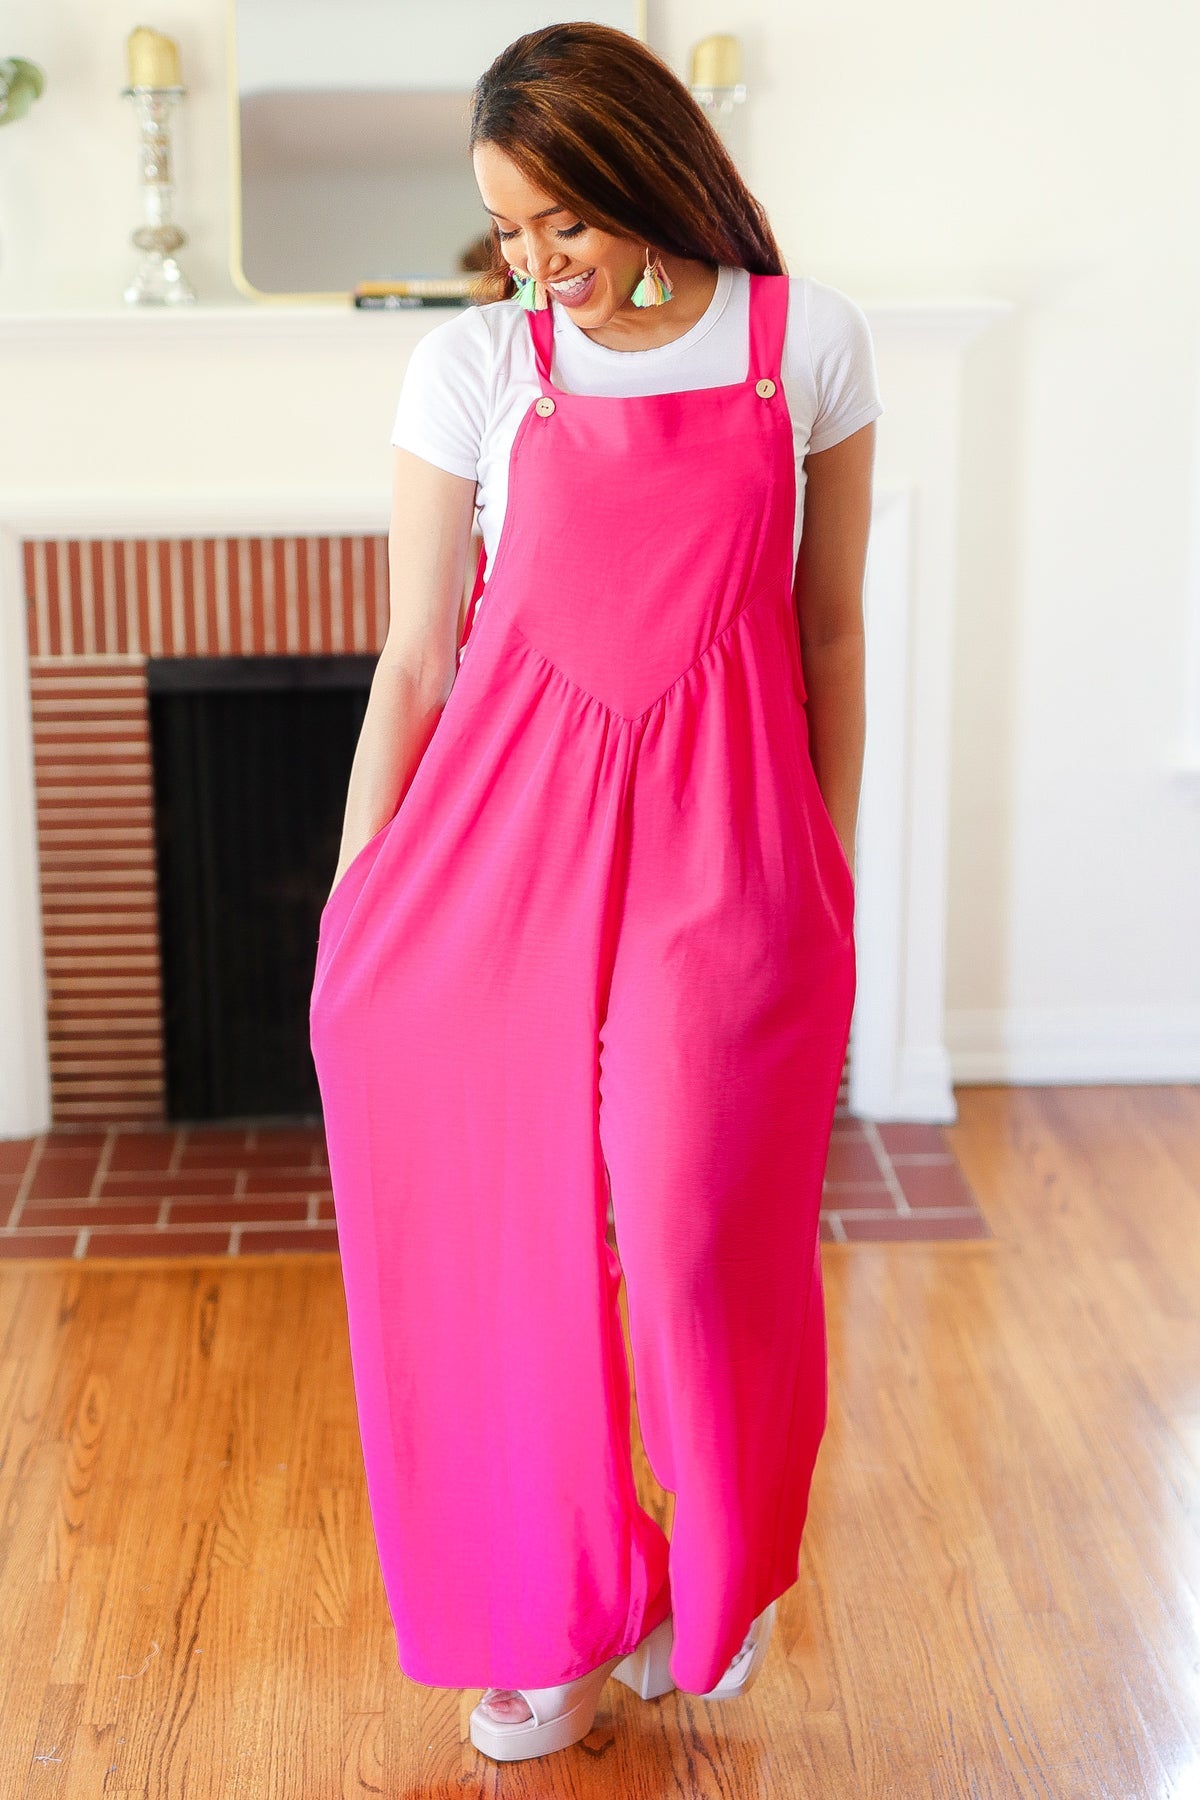 Explore More Collection - Summer Dreaming Pink Wide Leg Suspender Overall Jumpsuit